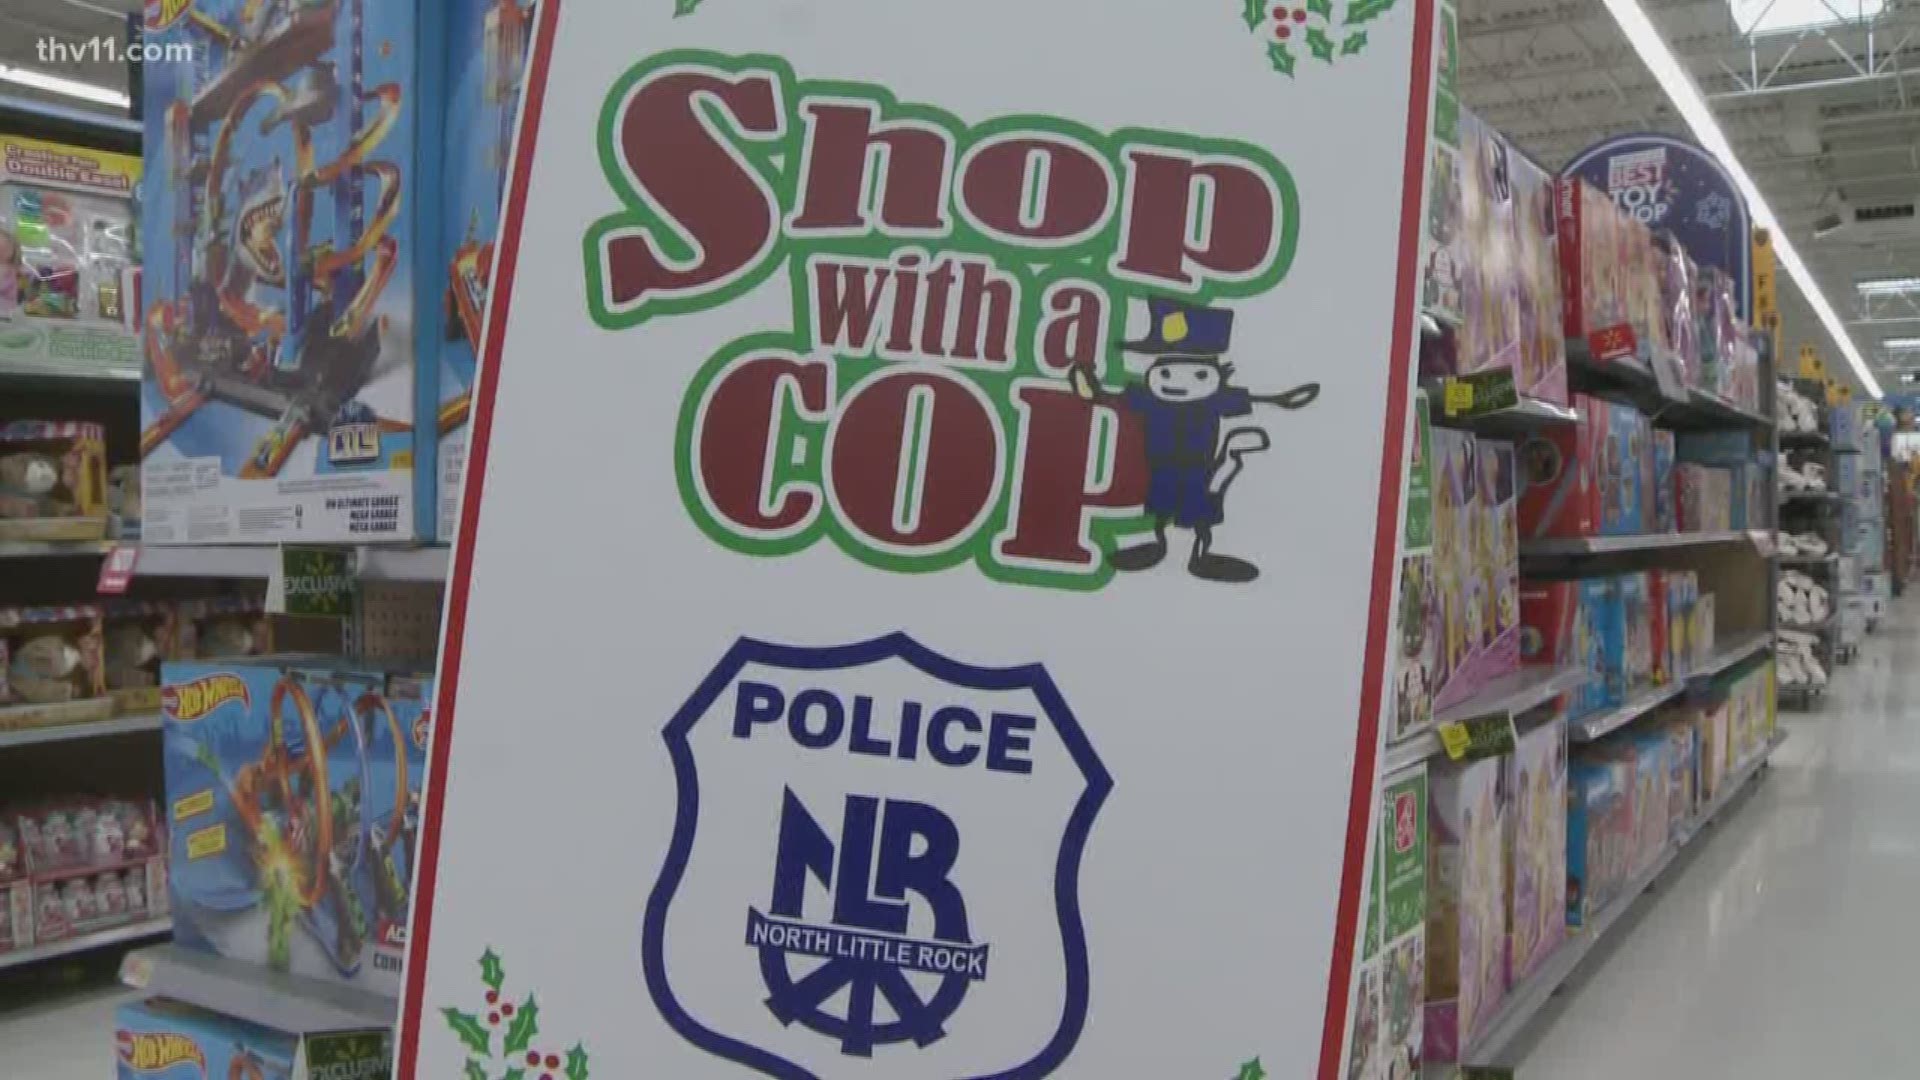 Along with their normal duties of fighting crime, North Little Rock police spent the morning making the Christmas season bright for dozens of kids.